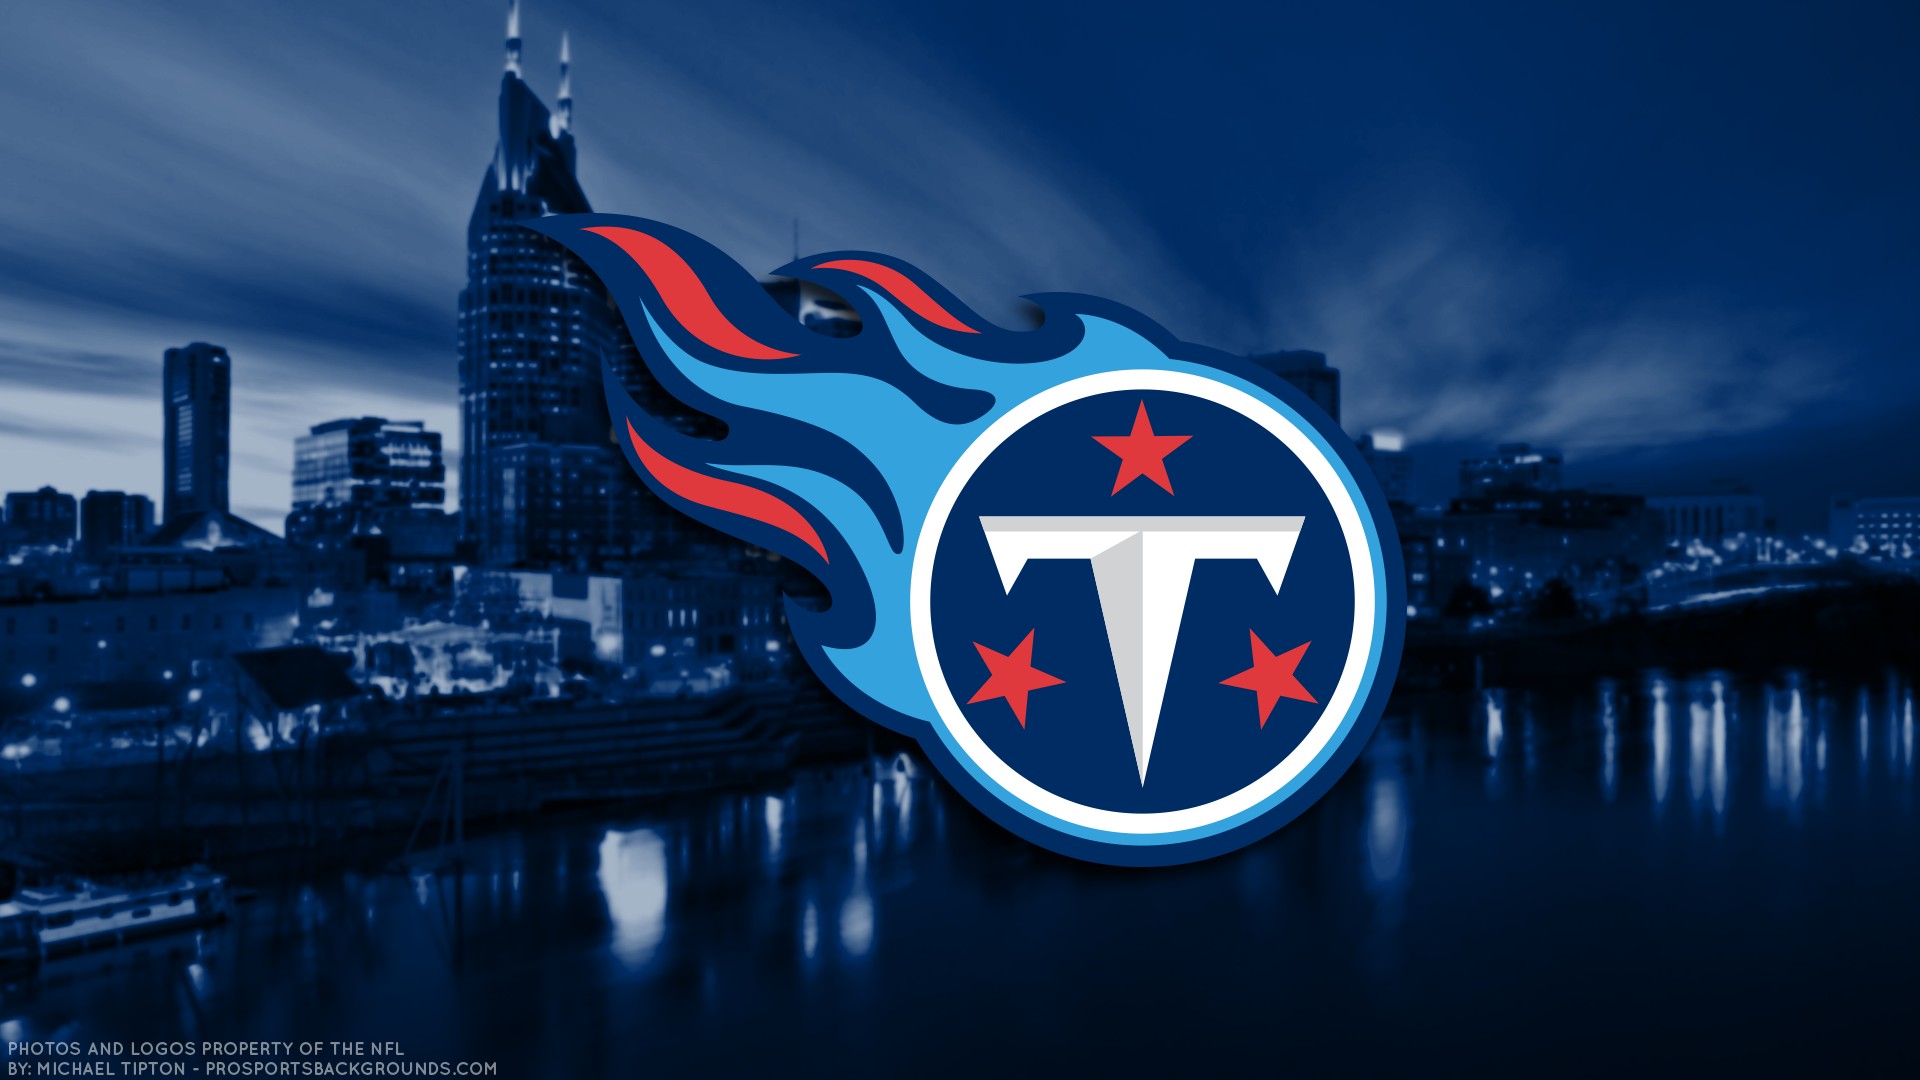 Tennessee Titans For PC Wallpaper With high-resolution 1920X1080 pixel. You can use this wallpaper for your Mac or Windows Desktop Background, iPhone, Android or Tablet and another Smartphone device